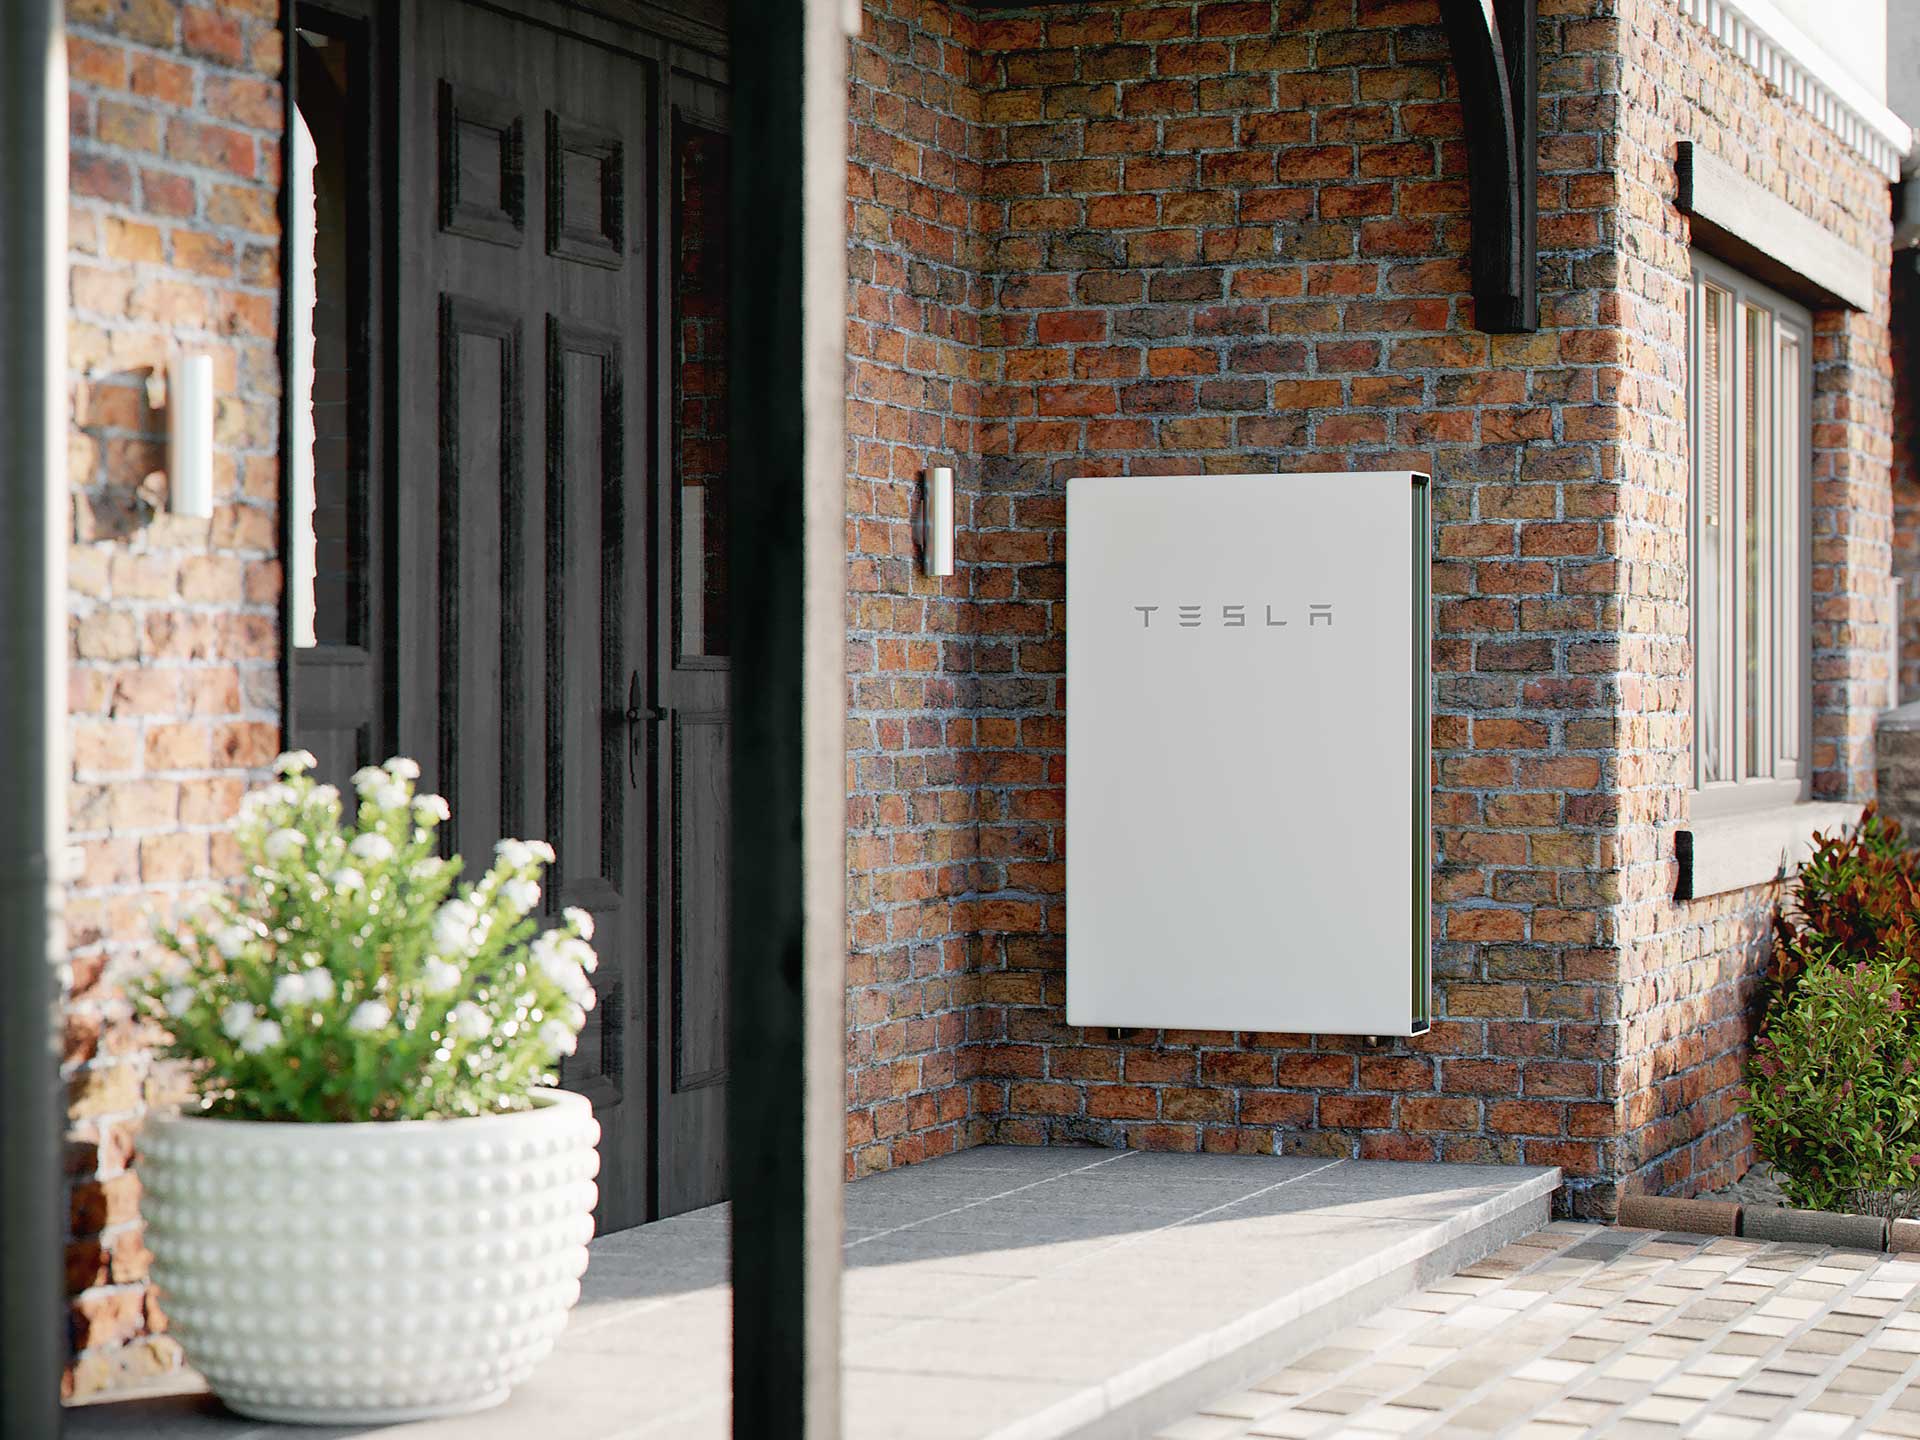 The Tesla Powerwall can be used indoor or outdoors